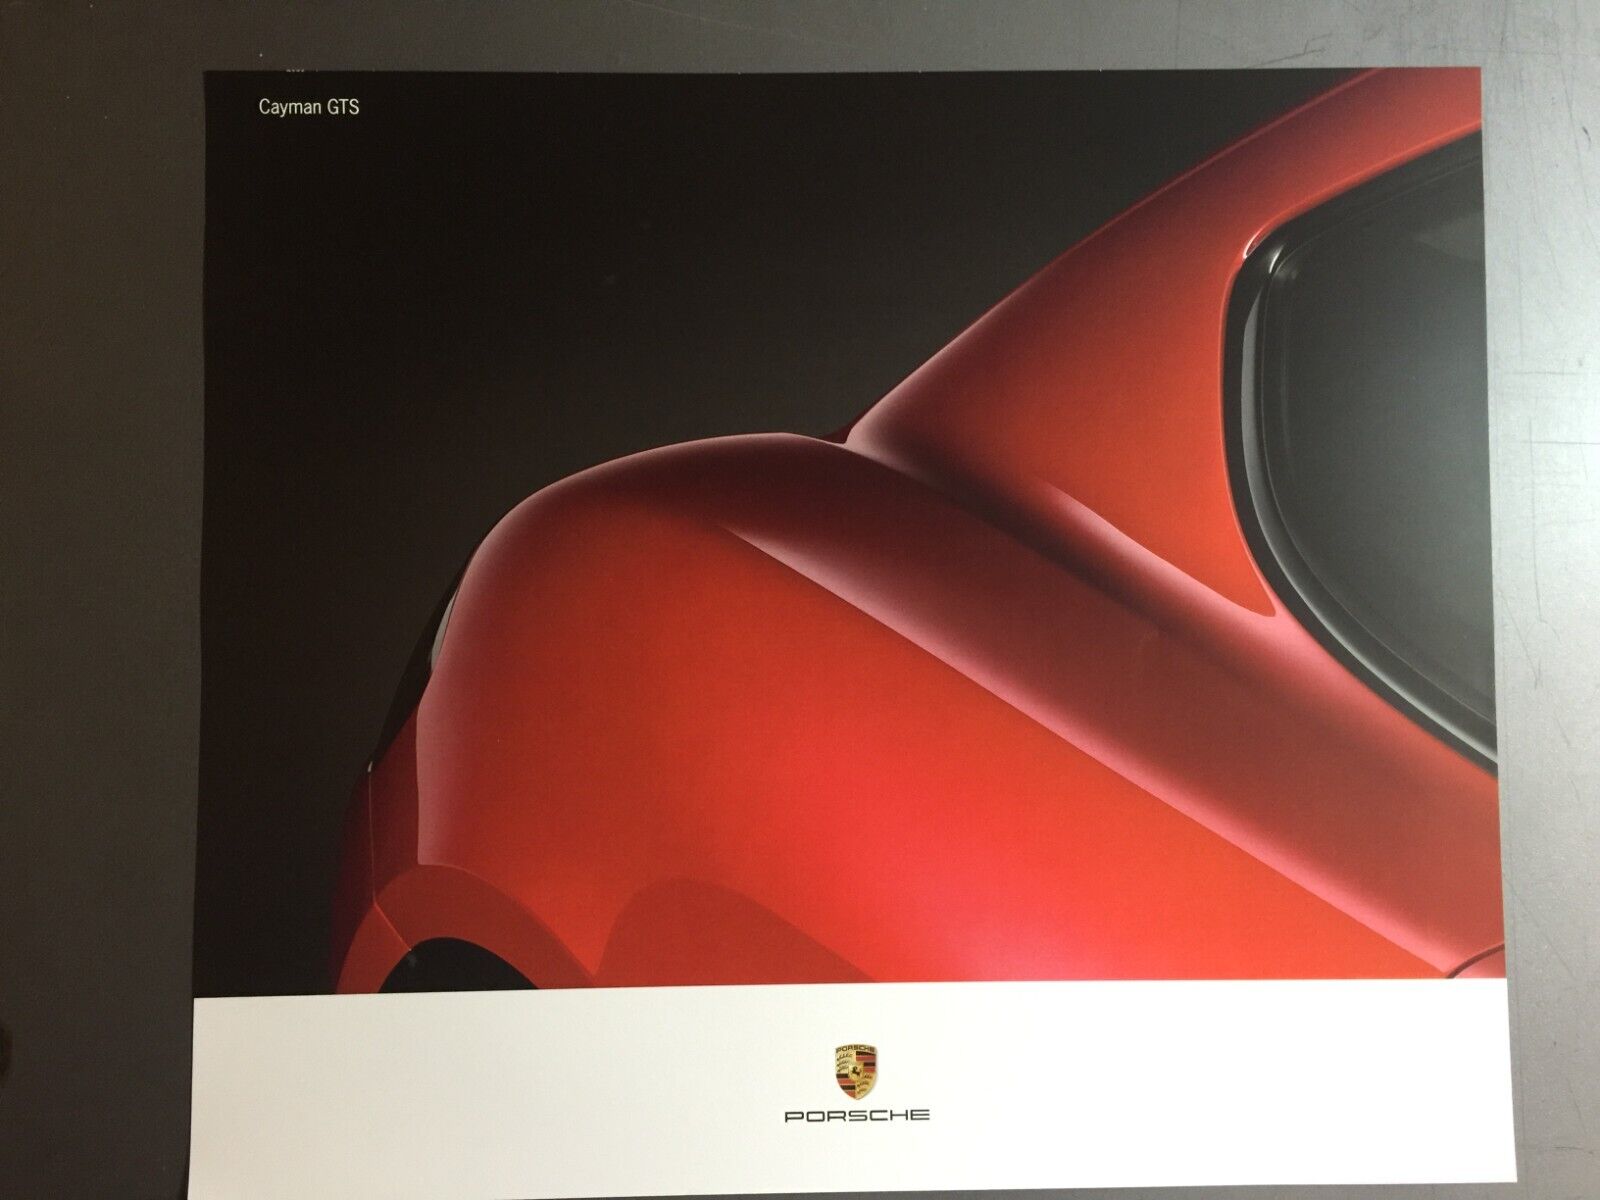 2016 Porsche Cayman GTS Coupe Showroom Advertising Poster - RARE Awesome L@@K